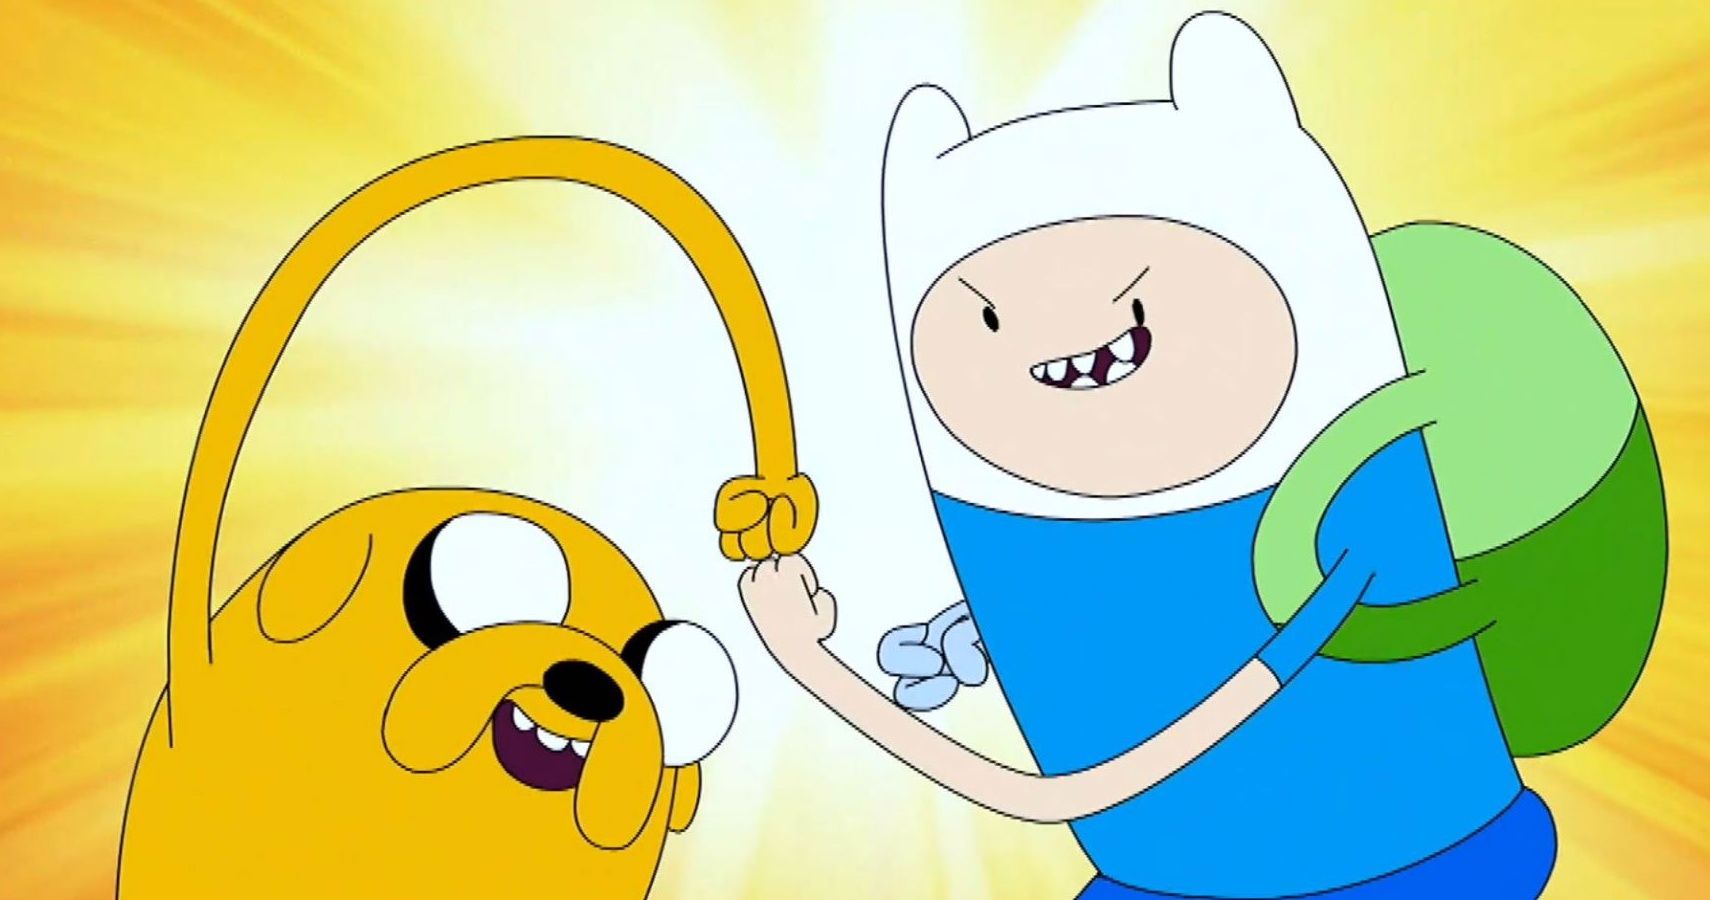 Adventure Time: 10 Of The Most Relatable Quotes ... - CBR